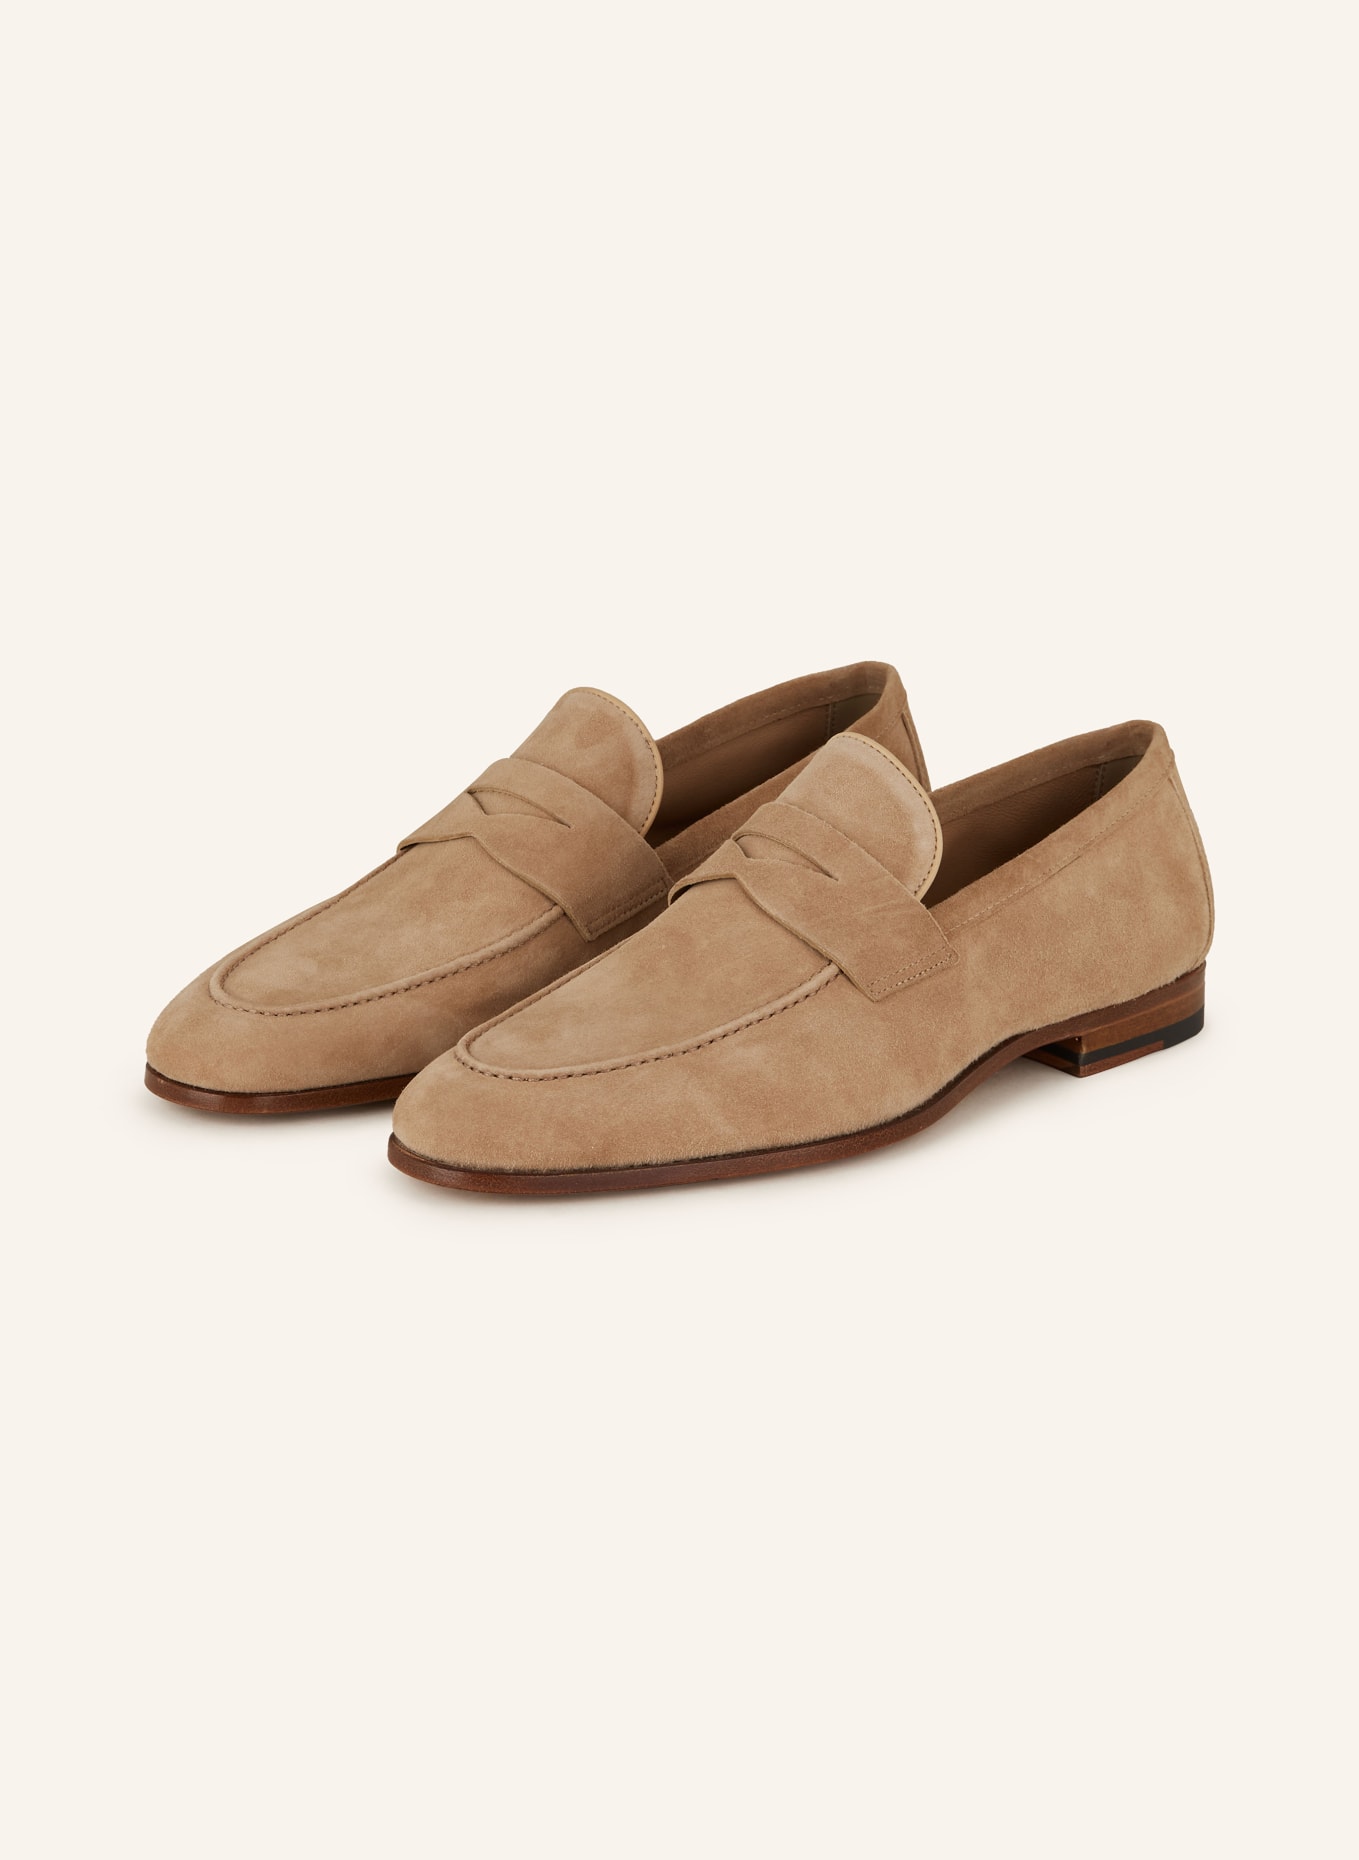 MAGNANNI Penny-Loafer, Farbe: TAUPE (Bild 1)